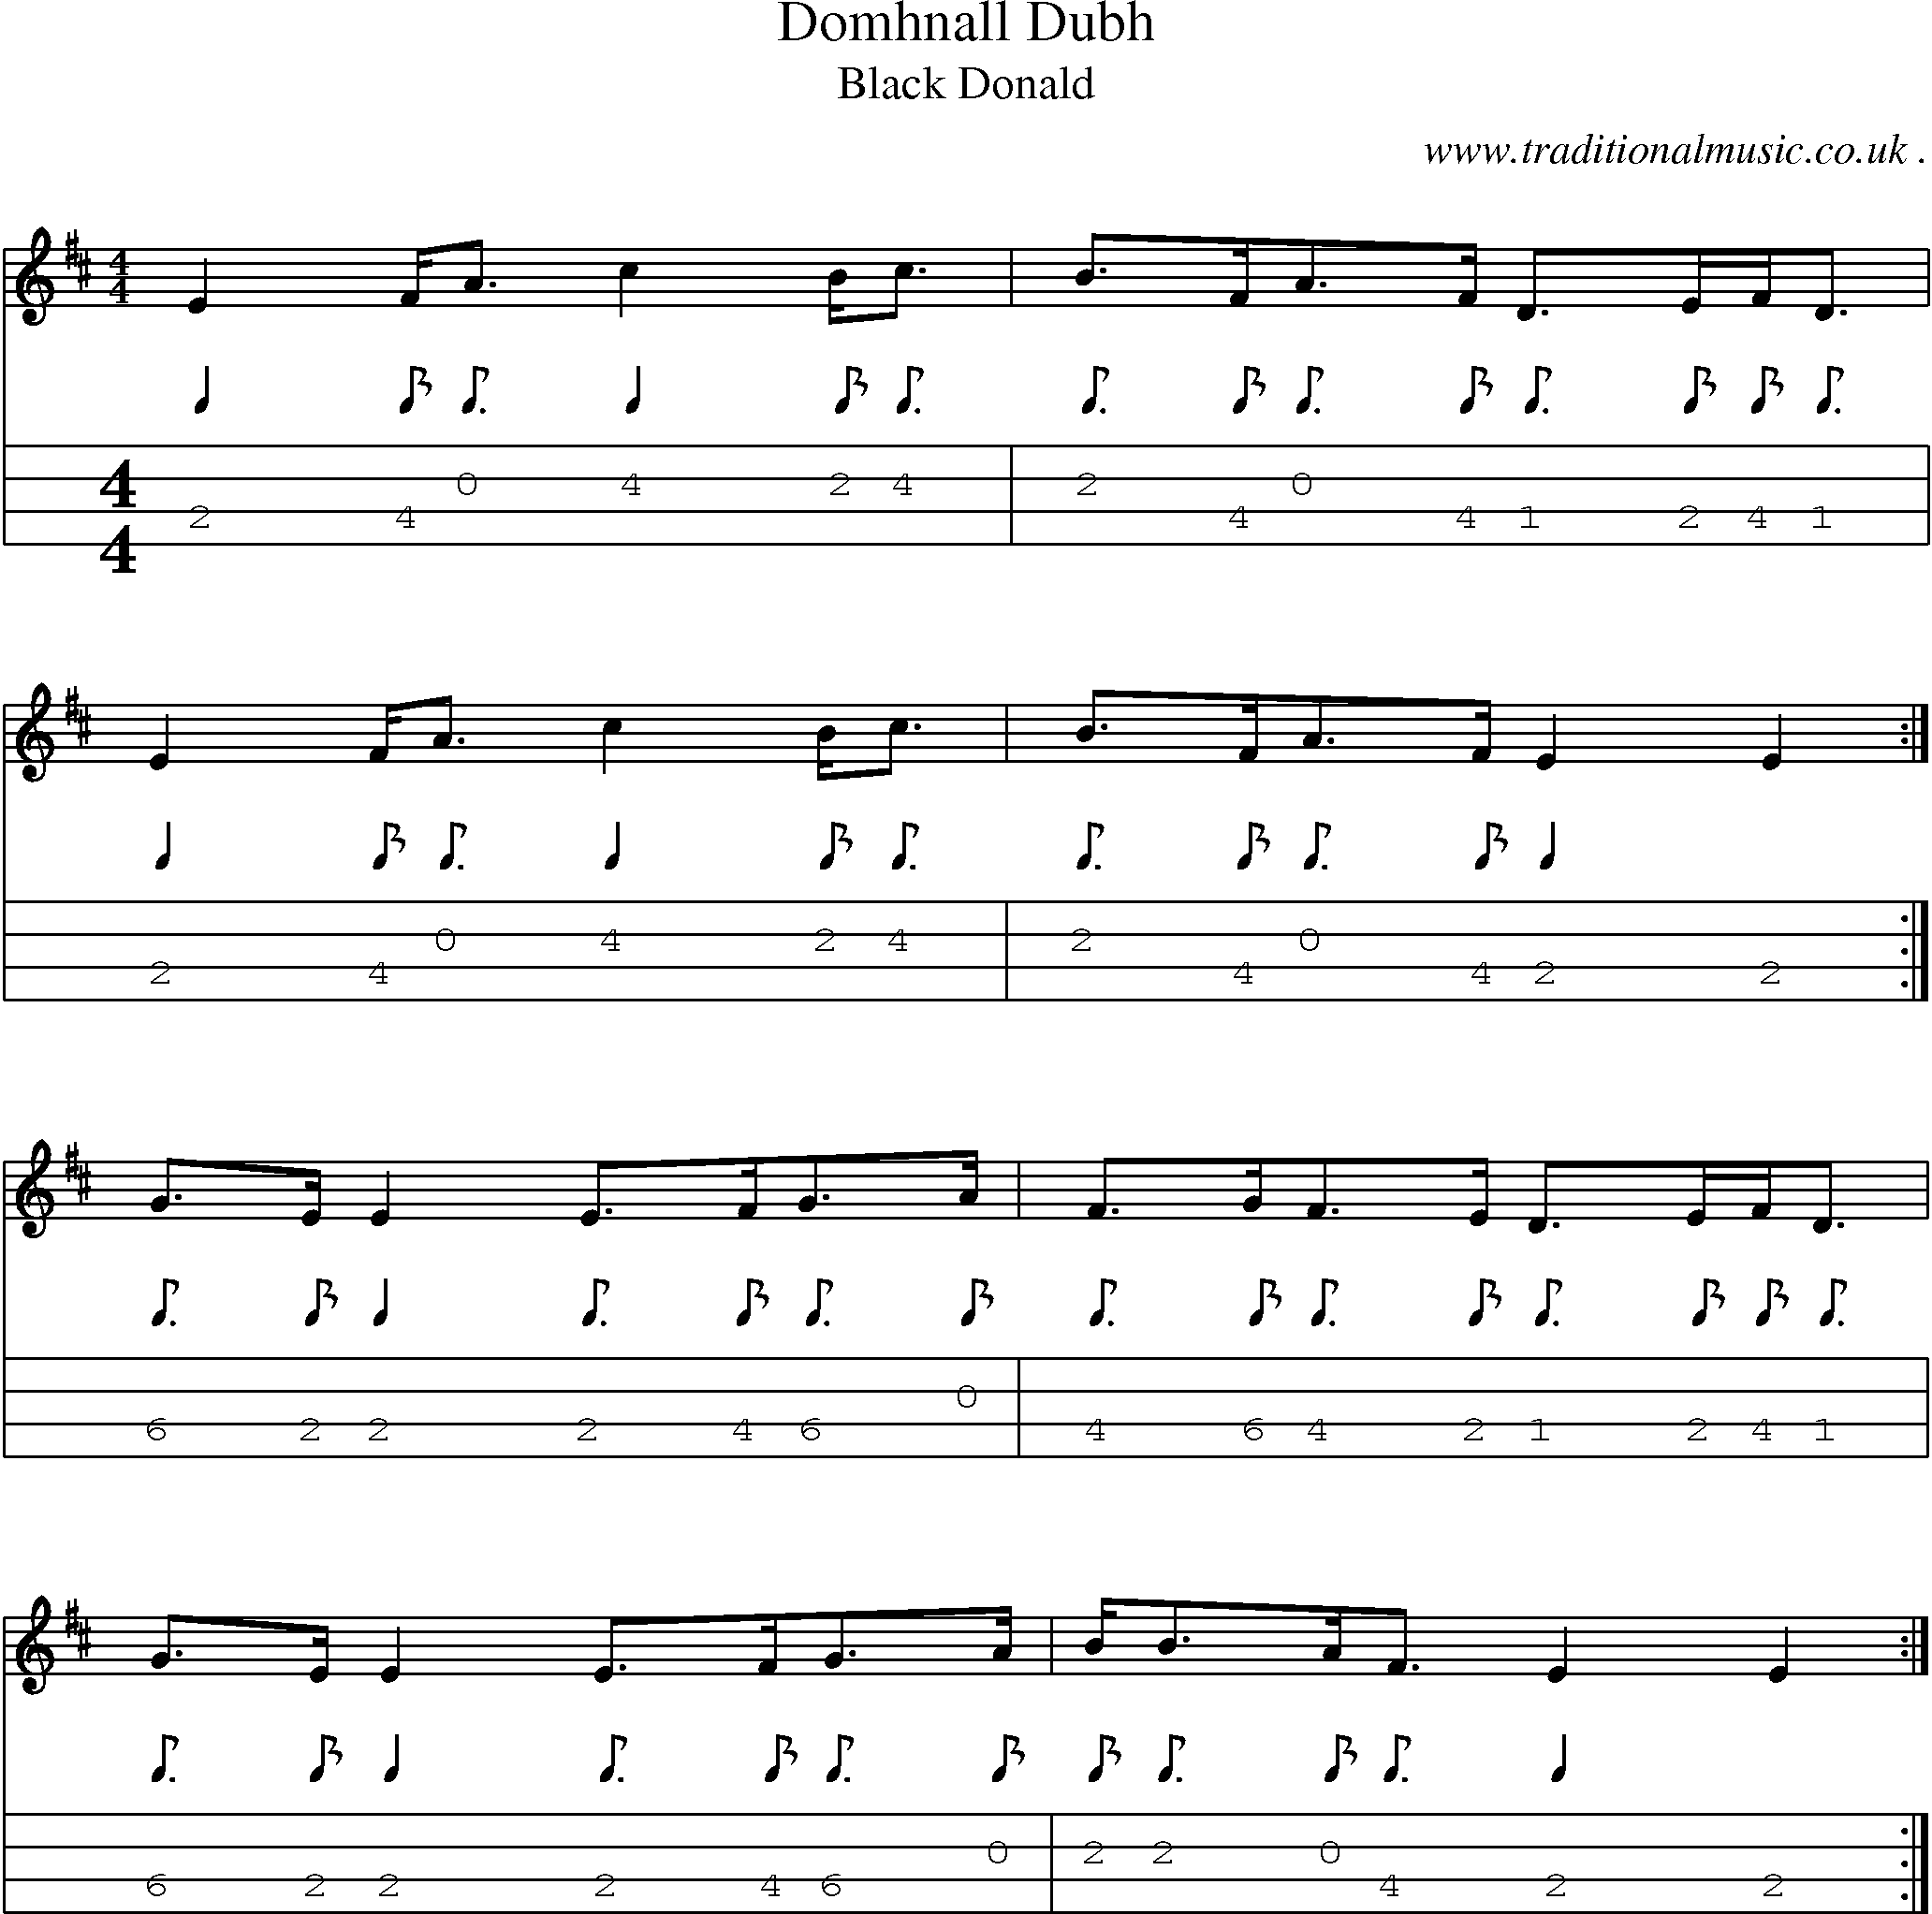 Sheet-music  score, Chords and Mandolin Tabs for Domhnall Dubh